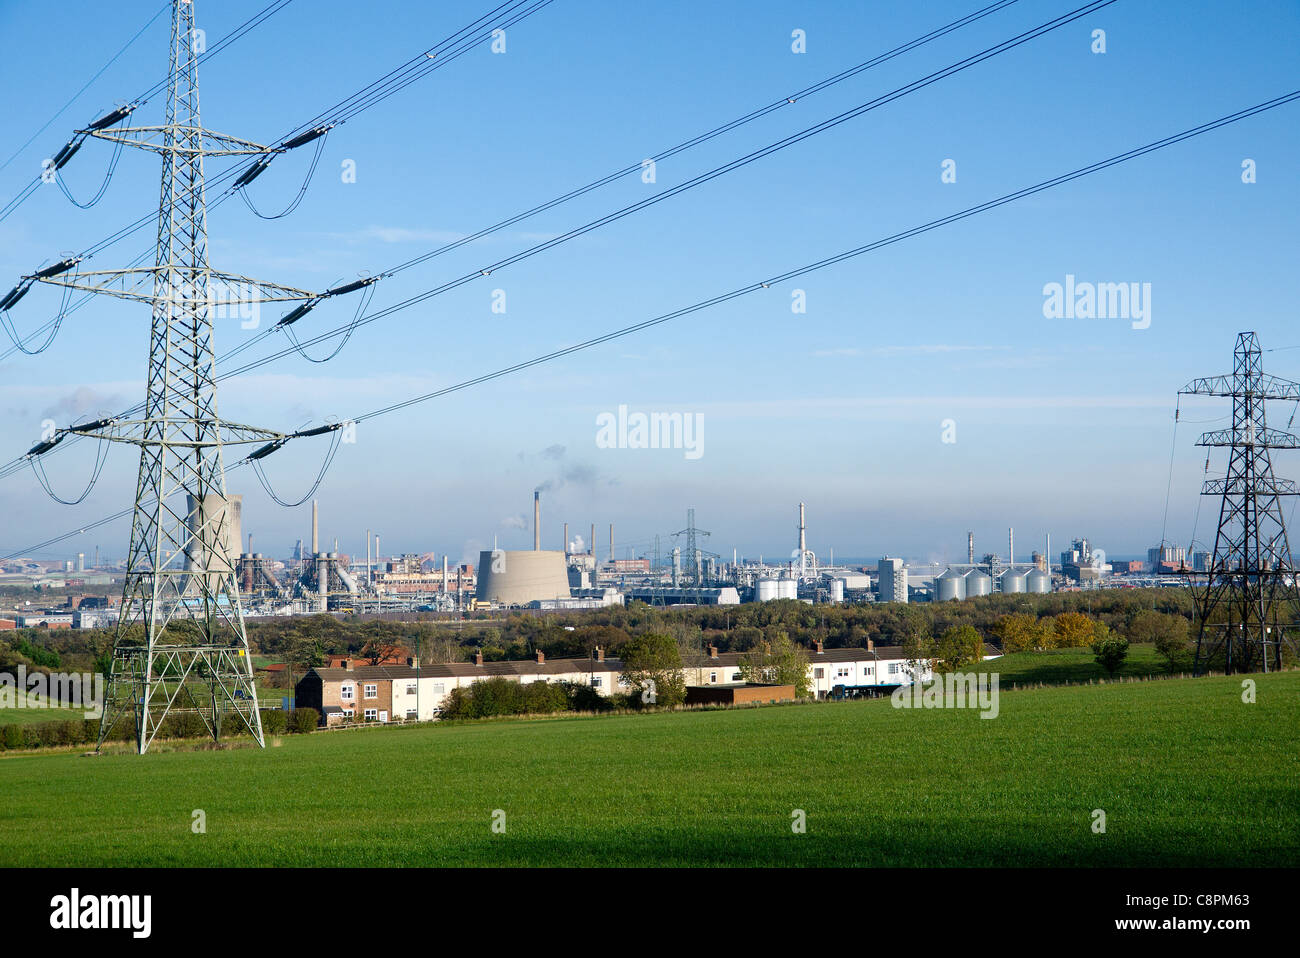 Wilton site chemical plant and Teesside Gas turbine power station electrical power distribution Transmission towers or  pylons Stock Photo